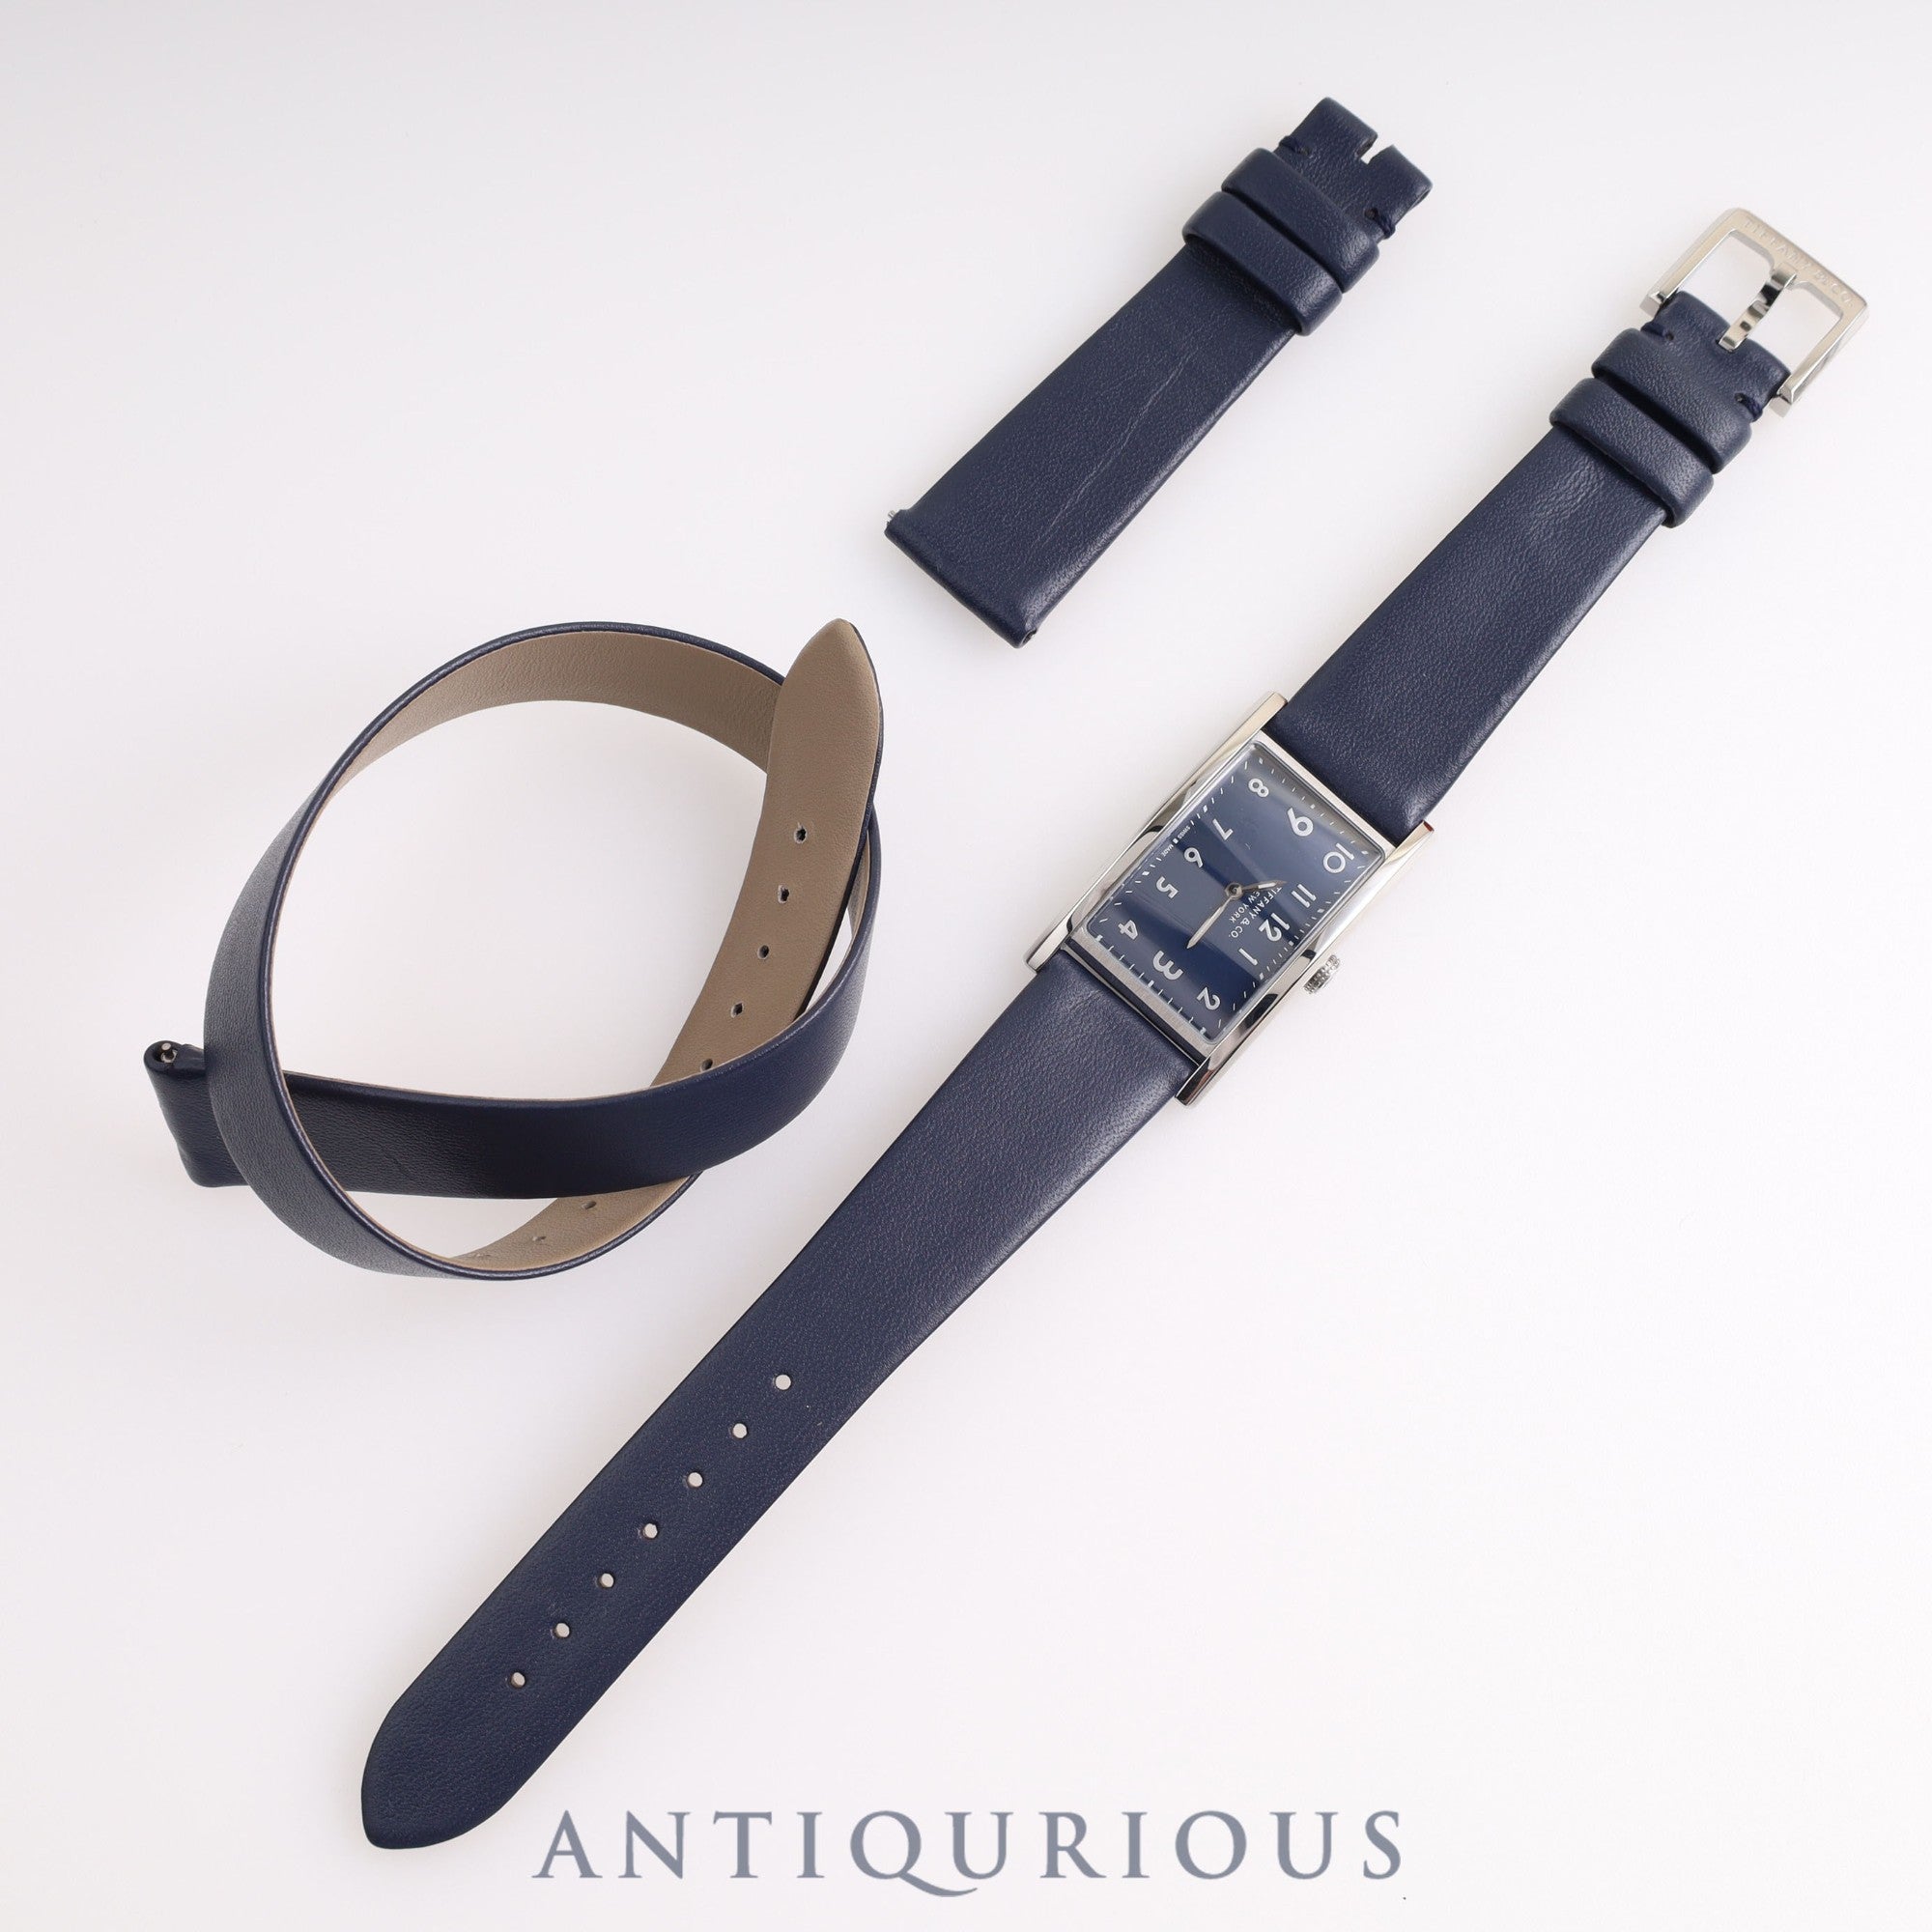 TIFFANY EASTWEST MINI 3668644 Quartz Genuine leather strap Navy dial Comes with a spare long strap